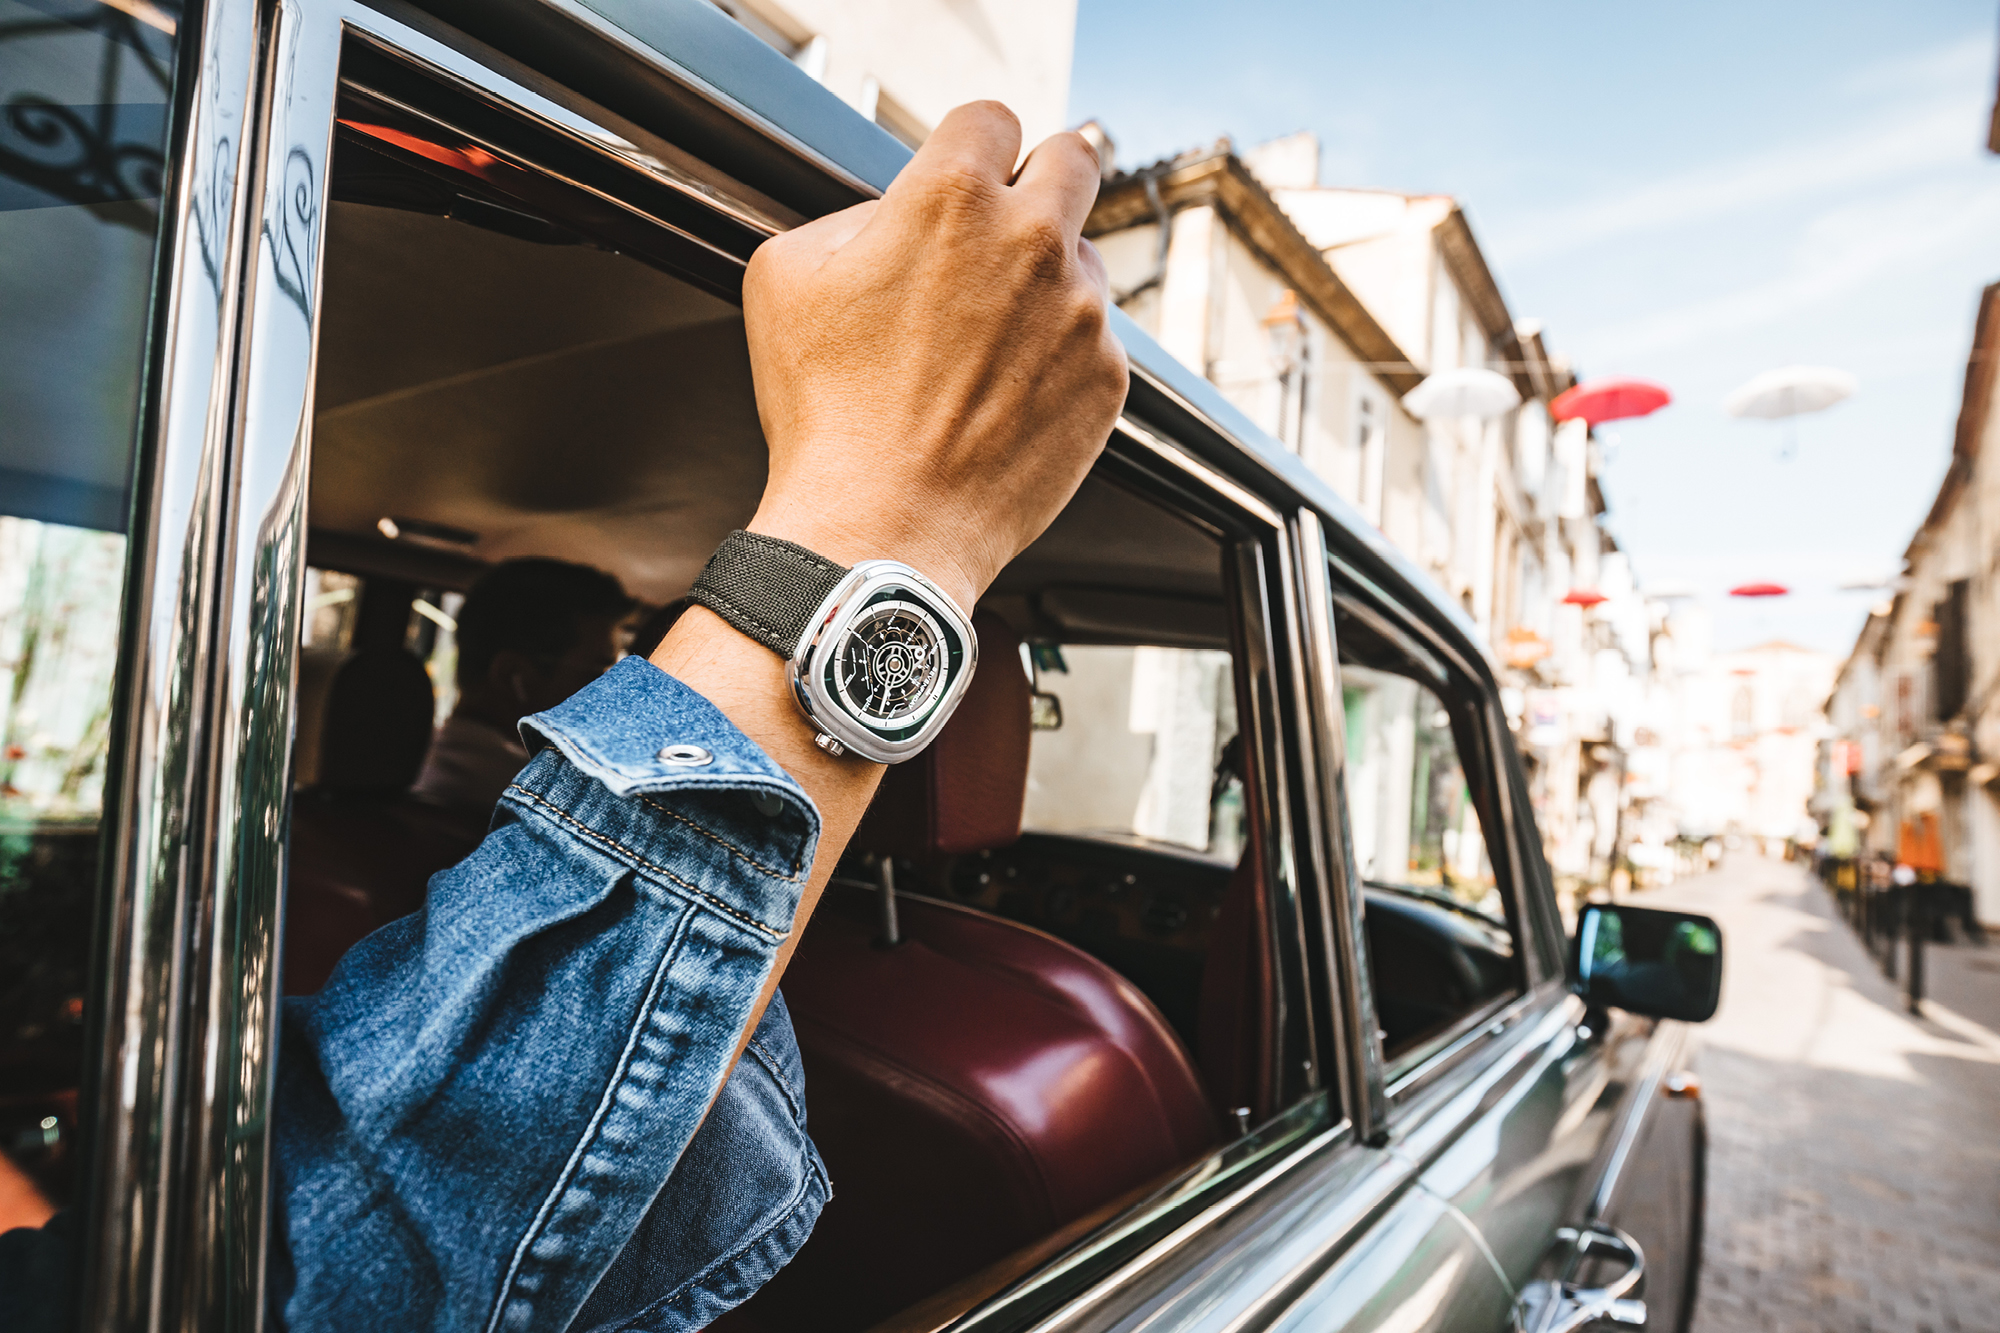 SevenFriday is a lifestyle and watch brand with a unique aesthetic and attitude